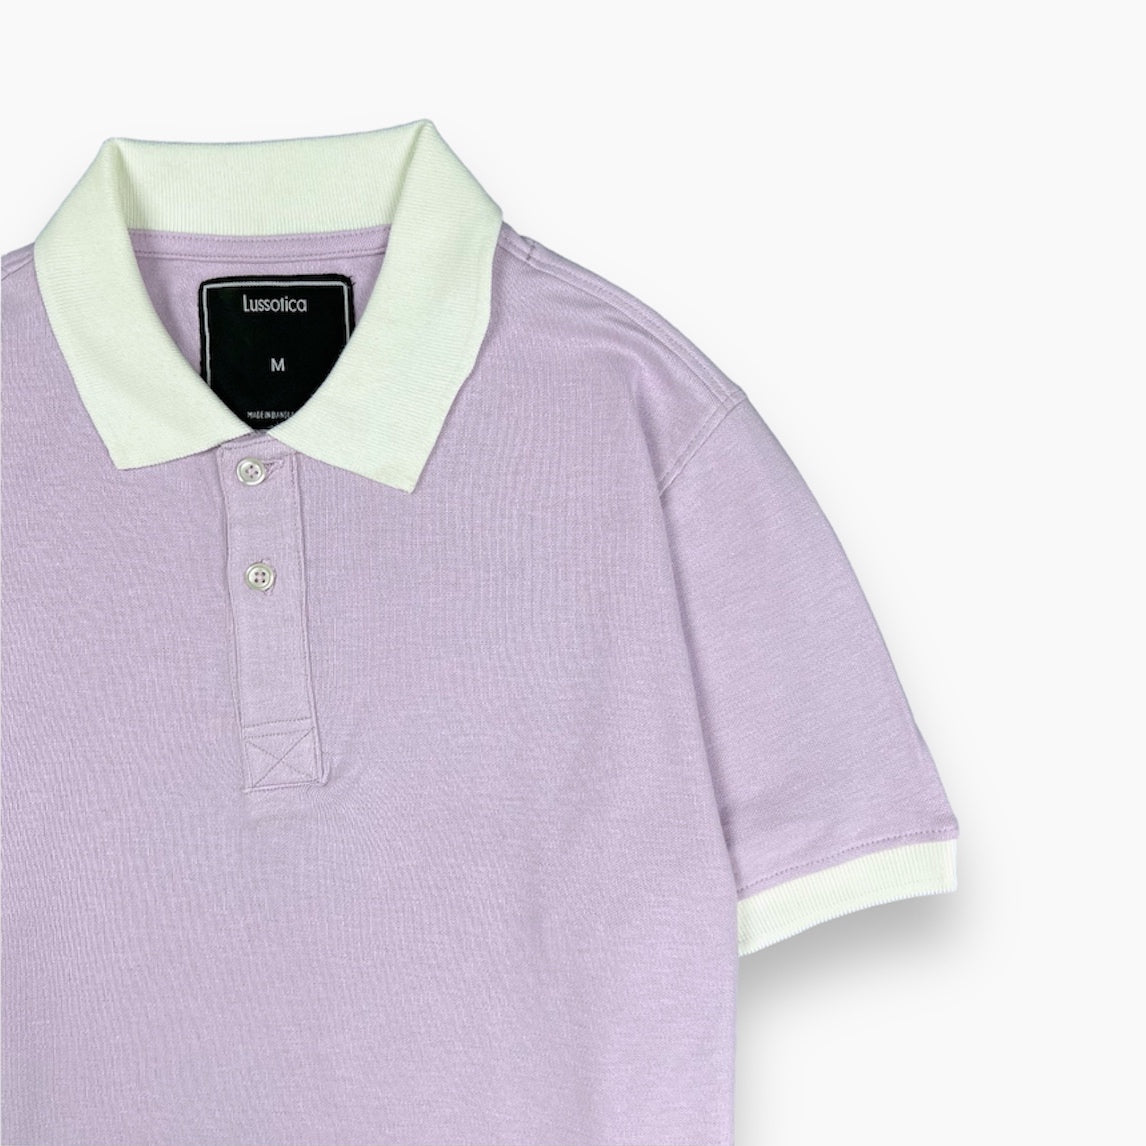 Polo Shirt by Lussotica - Periwinkle LU749 - Short Sleeve